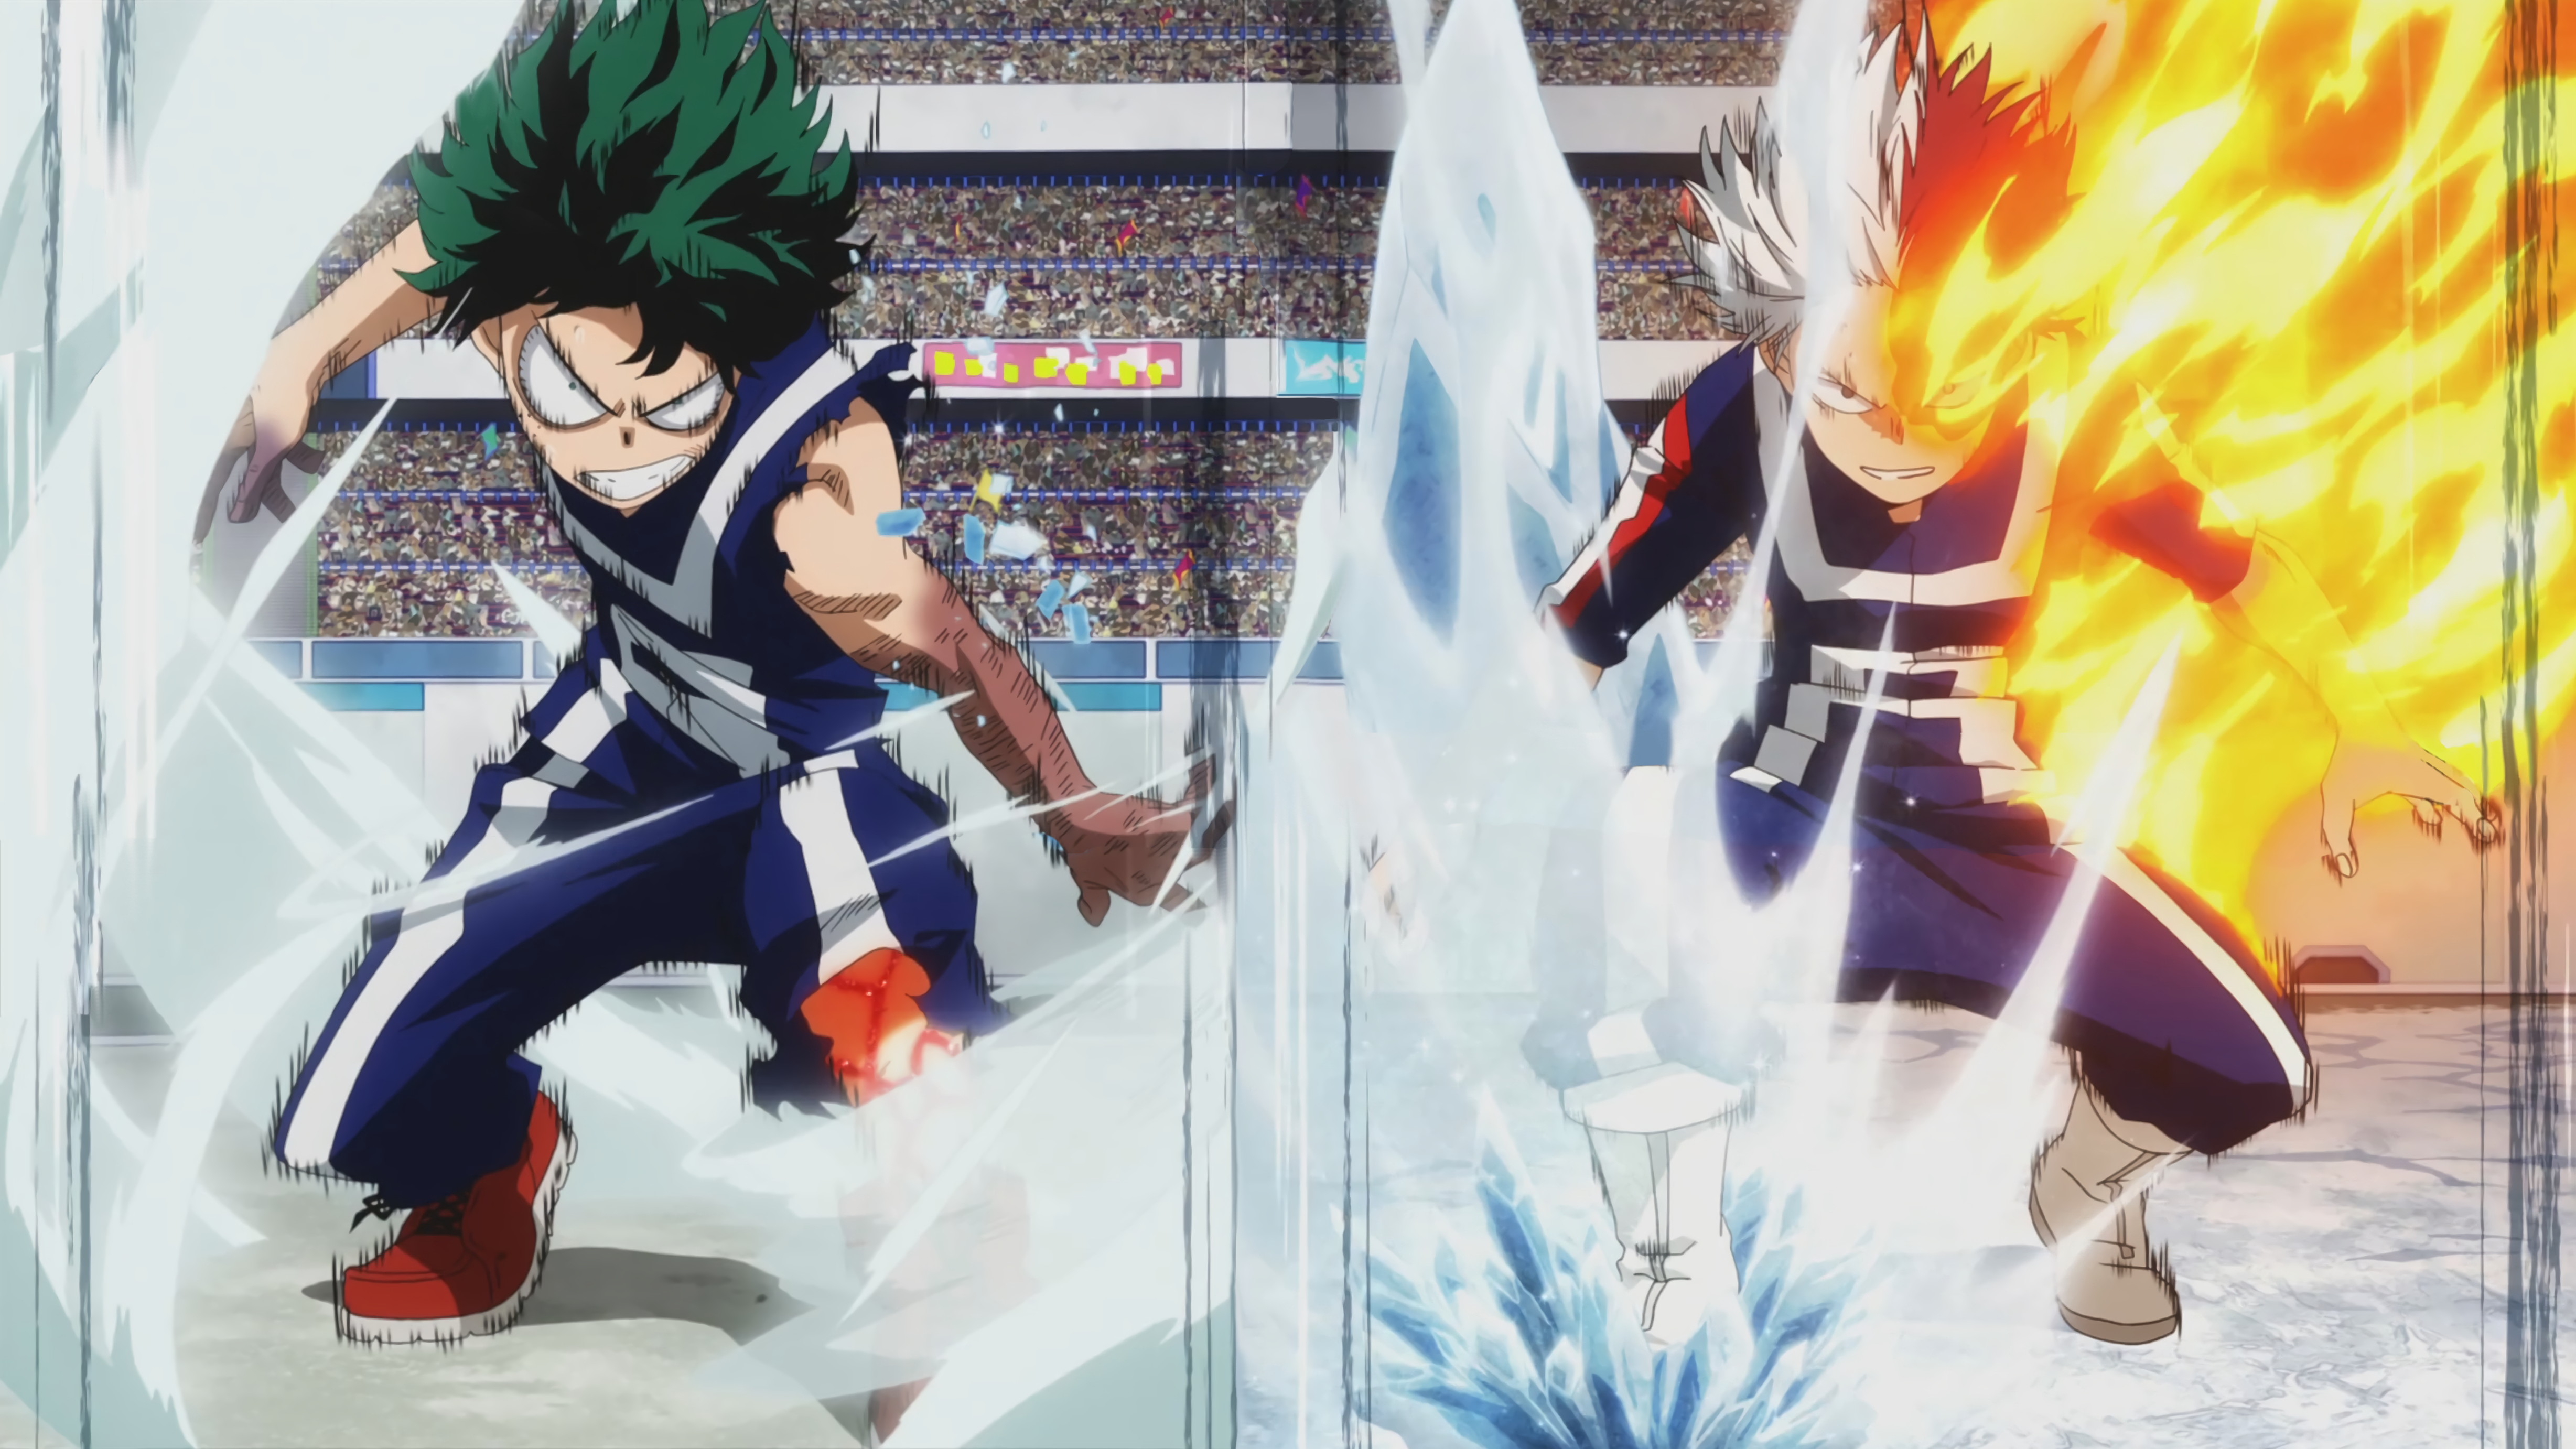 I Wanted A Wallpaper Of Todoroki From This Video Between 4:41 4:43 As A FullHD 1920x1080 Or Closest Possible Resolution. Can Someone Do This?: Animewallpaper